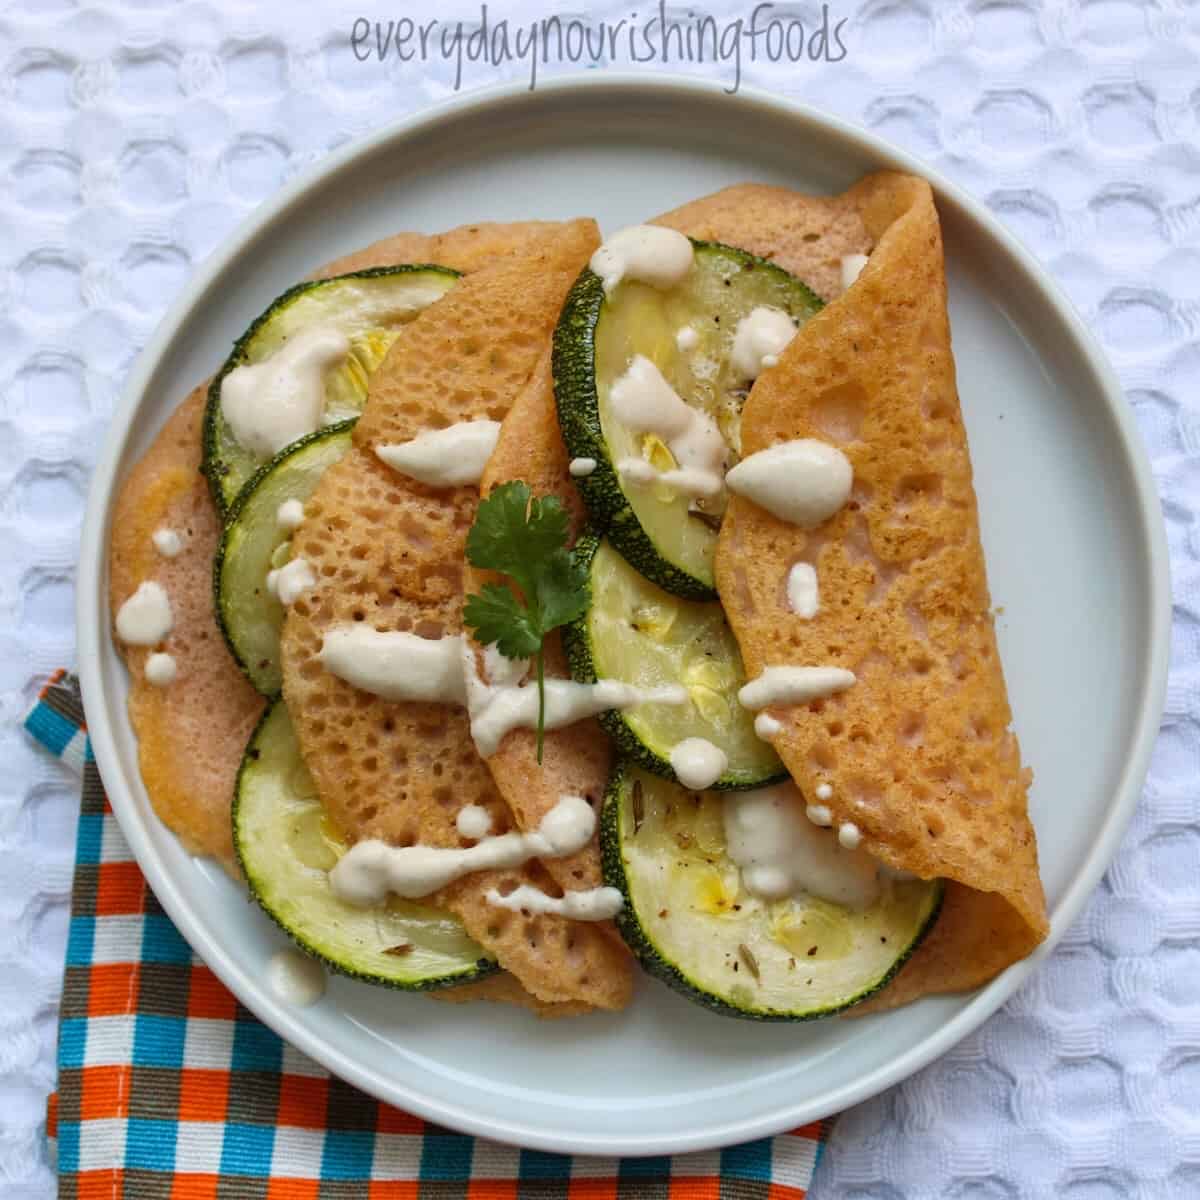 lentil tortillas with zucchini filling in a plate